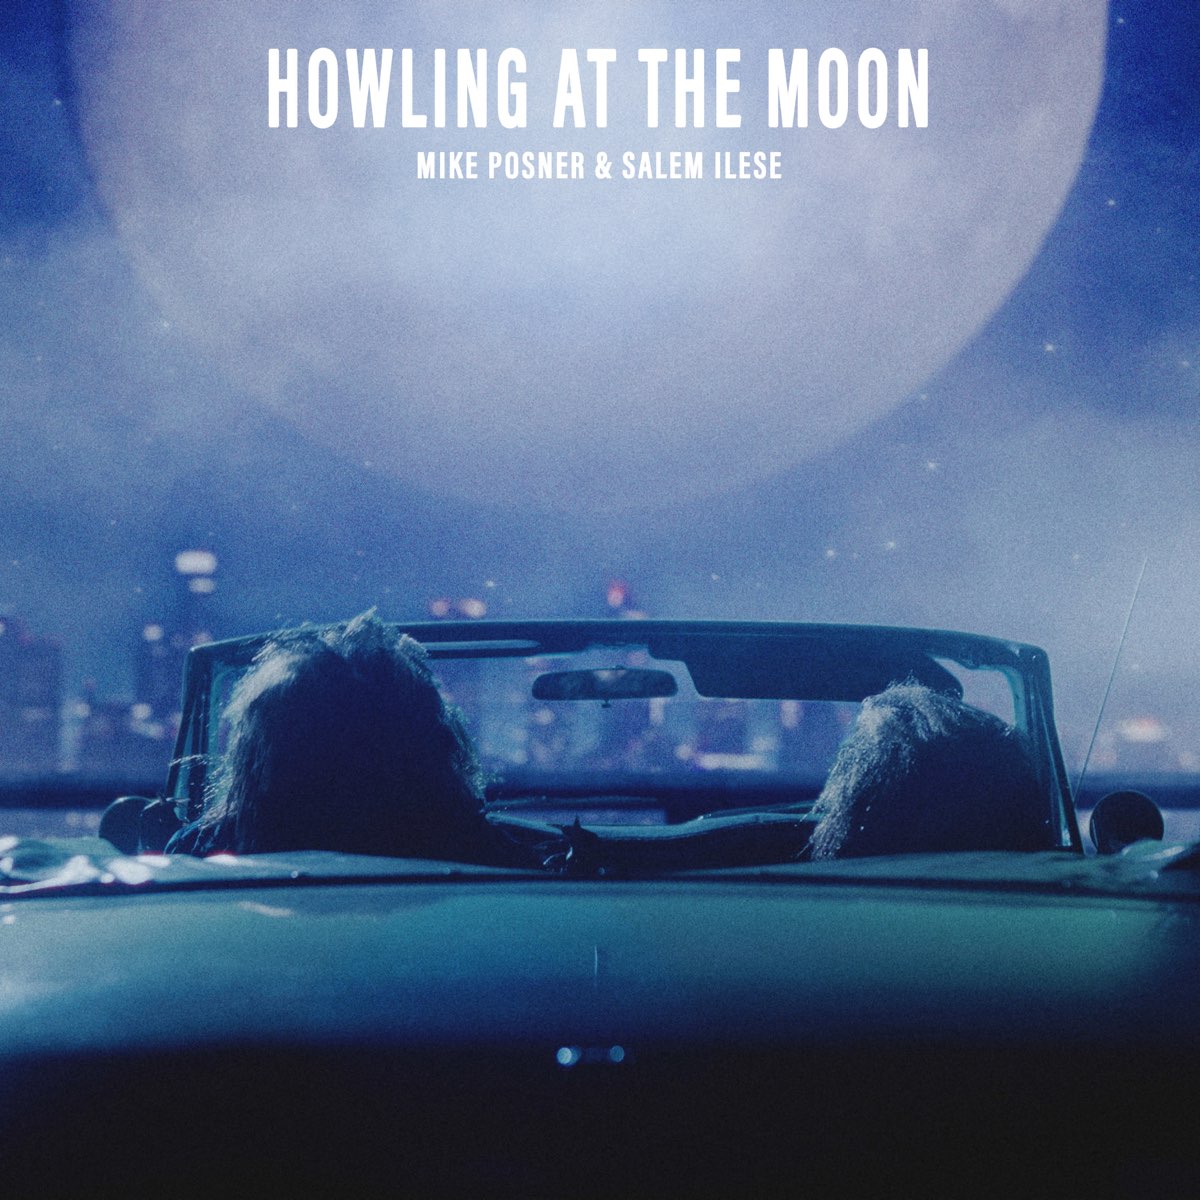 Mike Posner & salem ilese — Howling at the Moon cover artwork